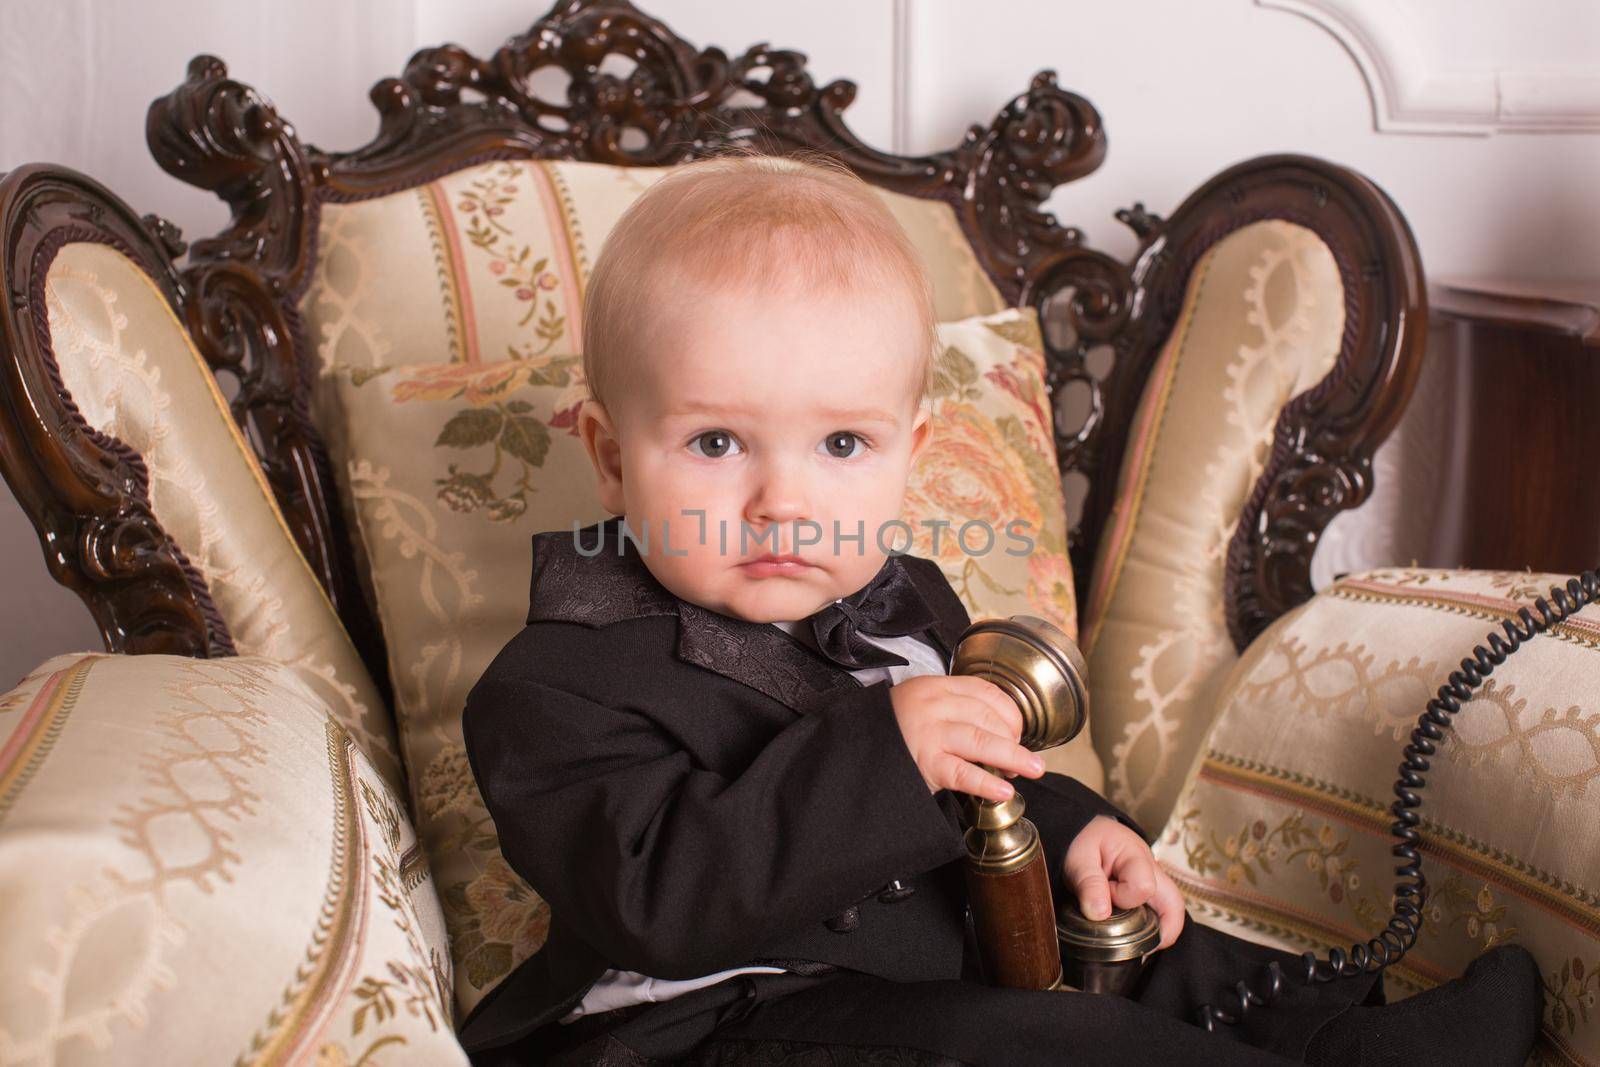 Child in a tuxedo sitting in an office talking on the phone.